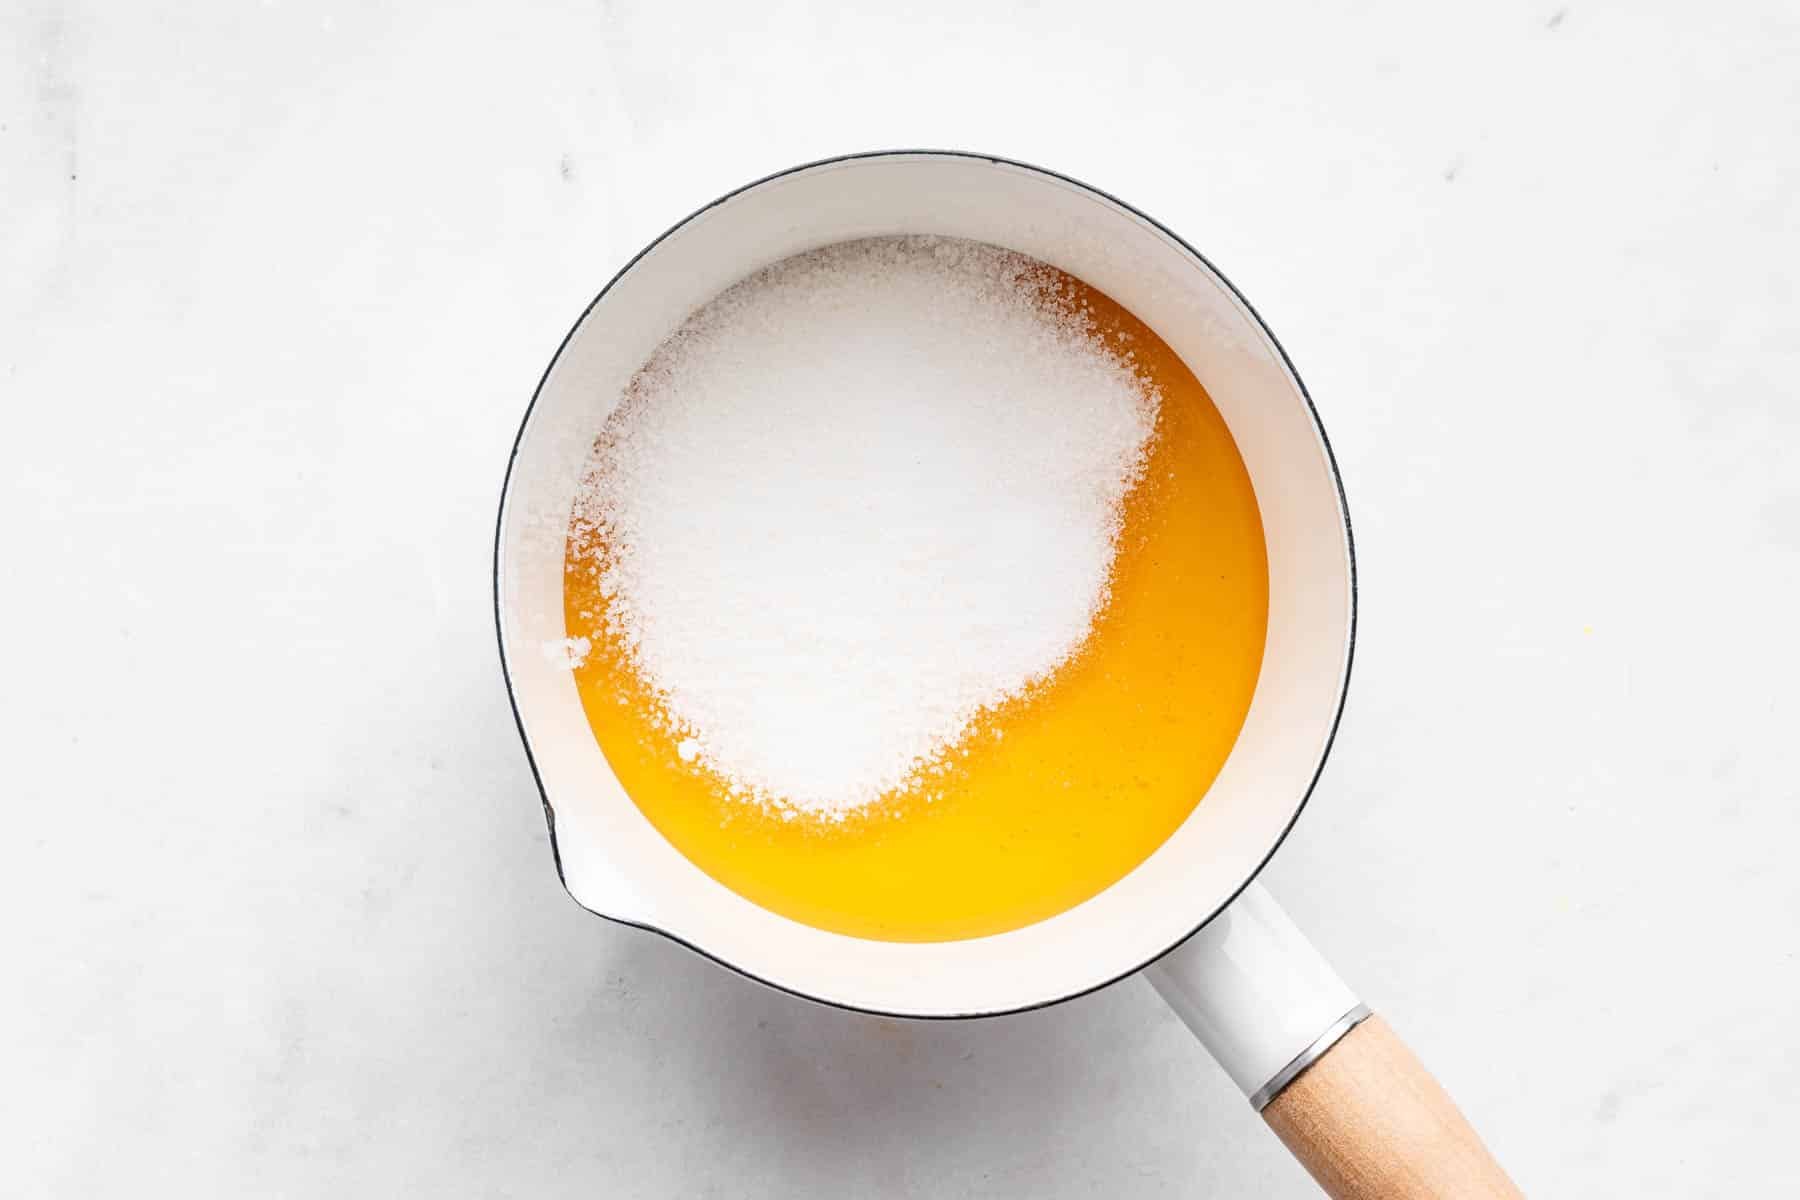 Small white saucepan with honey and sugar inside.